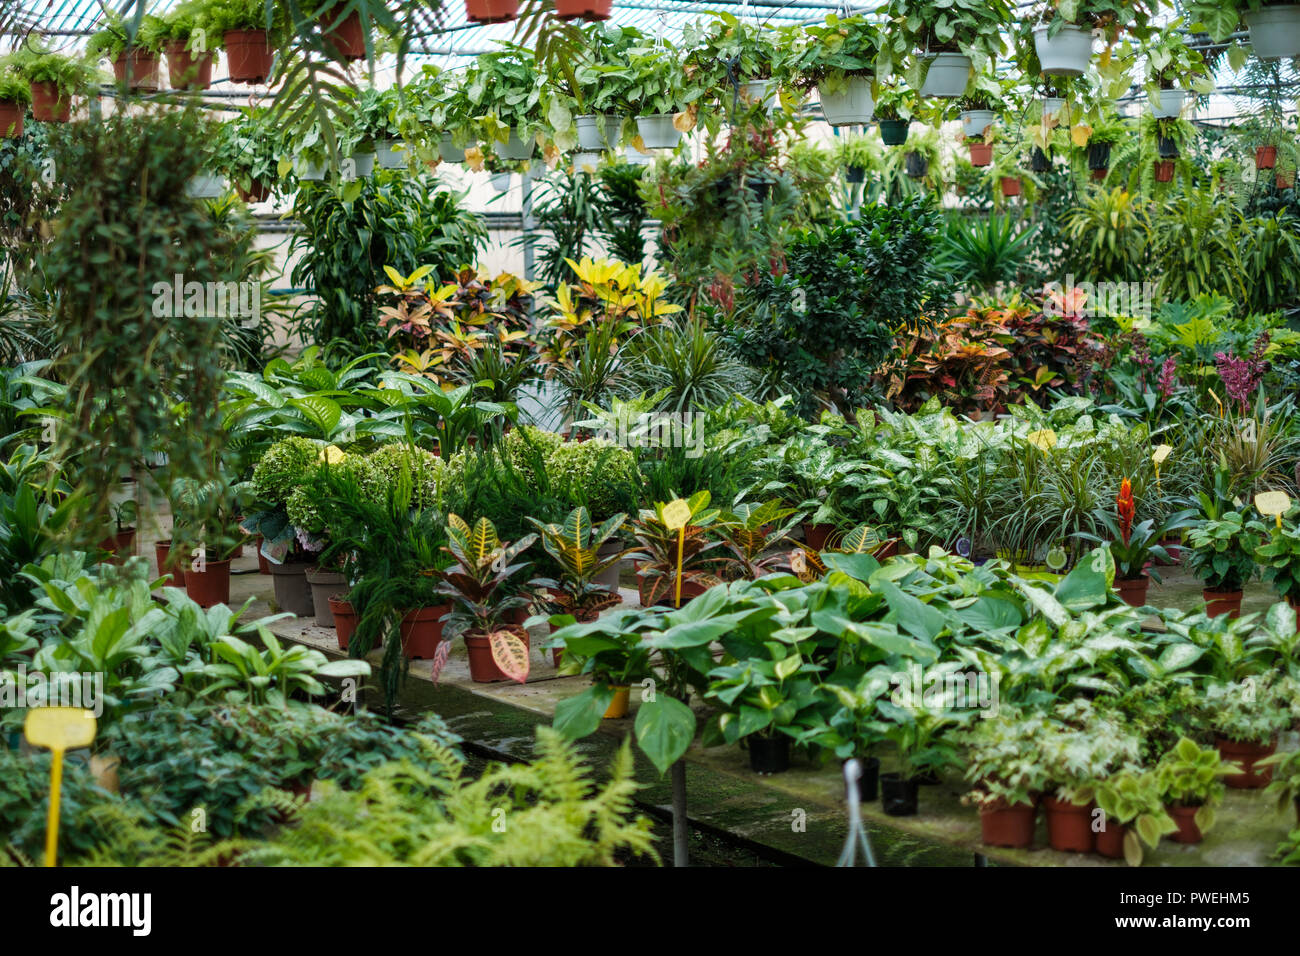 Tenerife, Canary islands - august, 2018: Flowers and plants for sale inside a greenhouse  in the north of the island Stock Photo